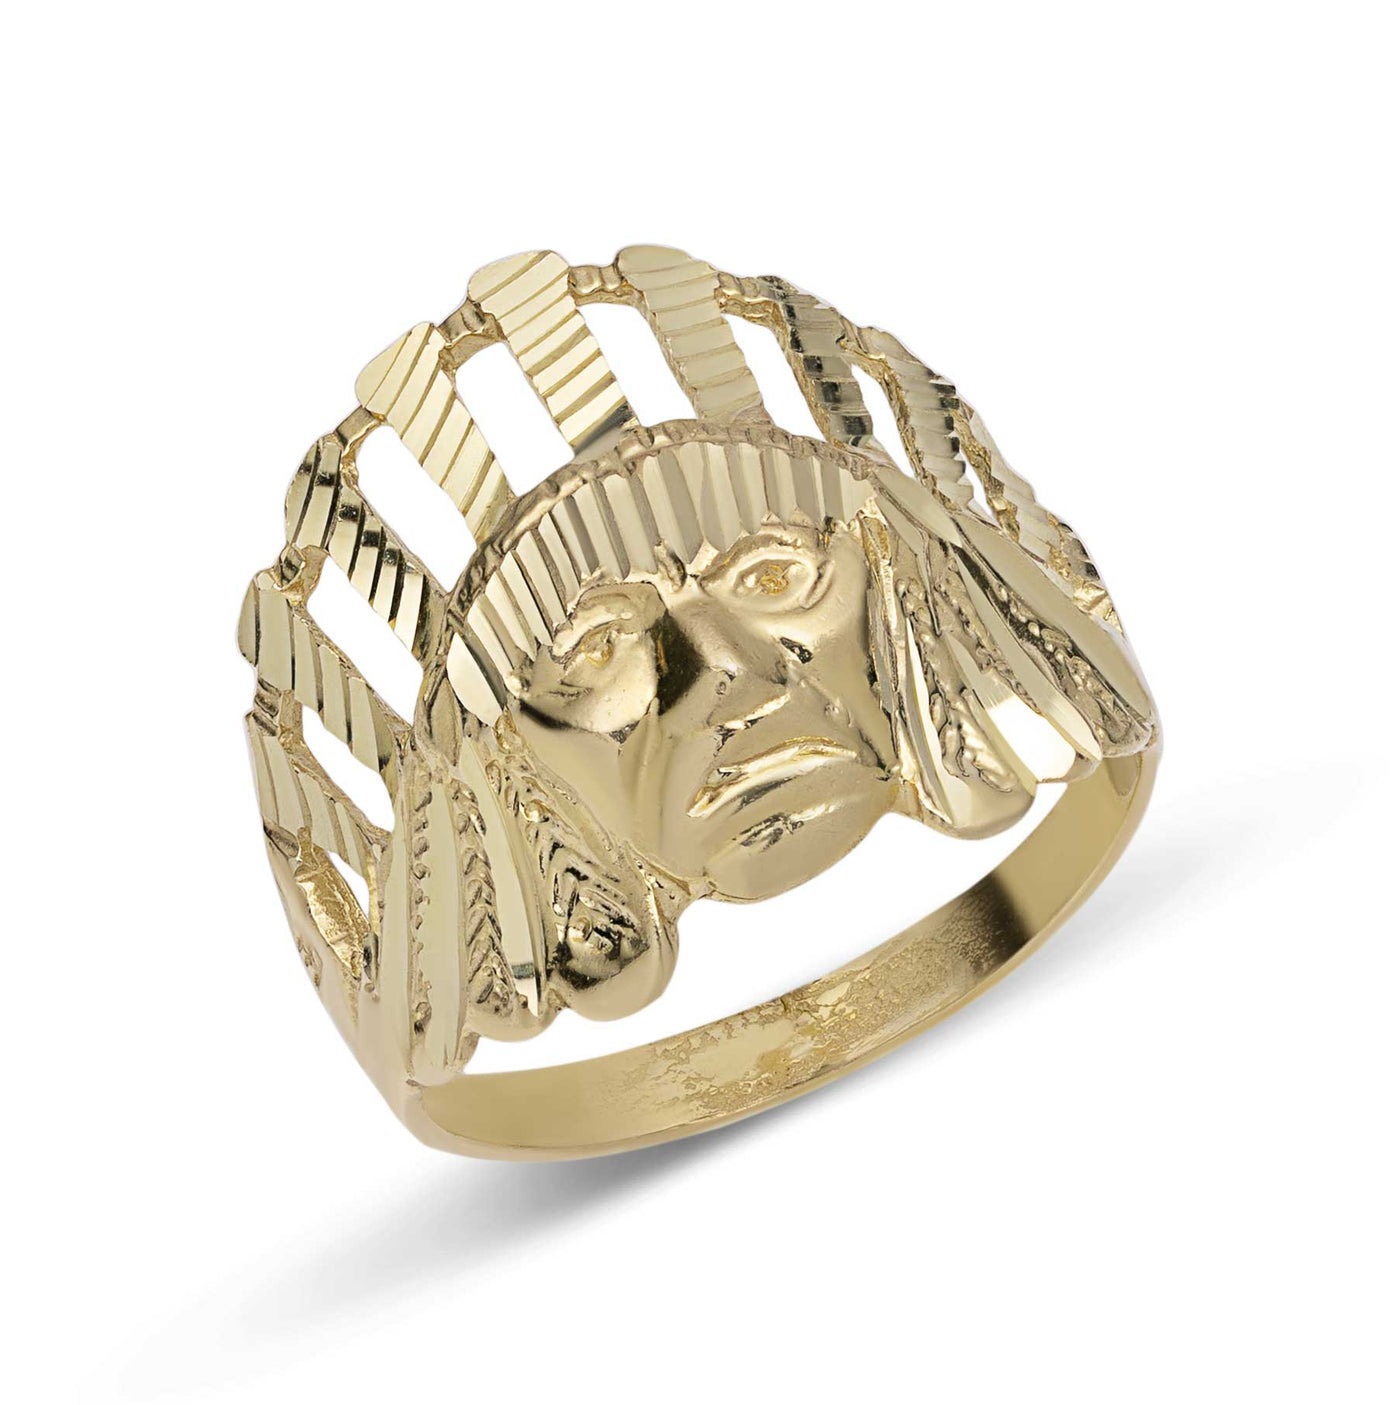 Mens Indian Chief Diamond Cut Ring Solid 10K Yellow Gold